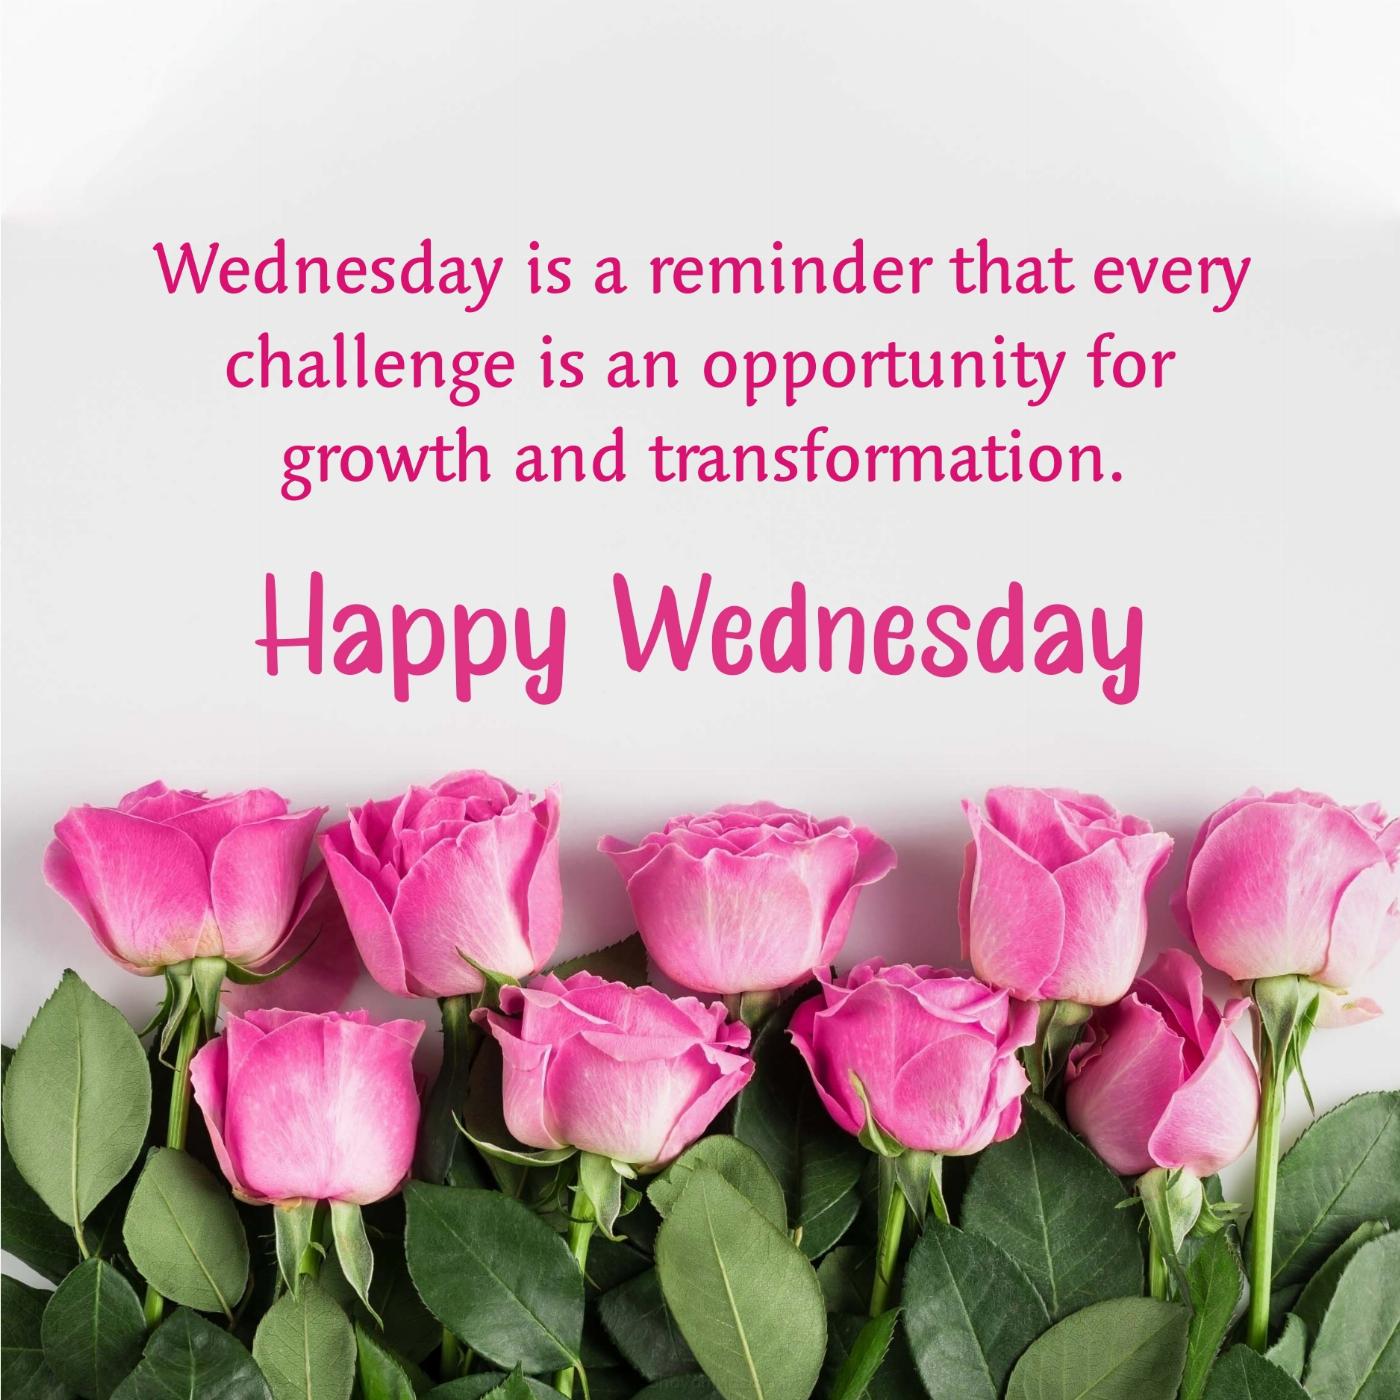 Wednesday is a reminder that every challenge is an opportunity